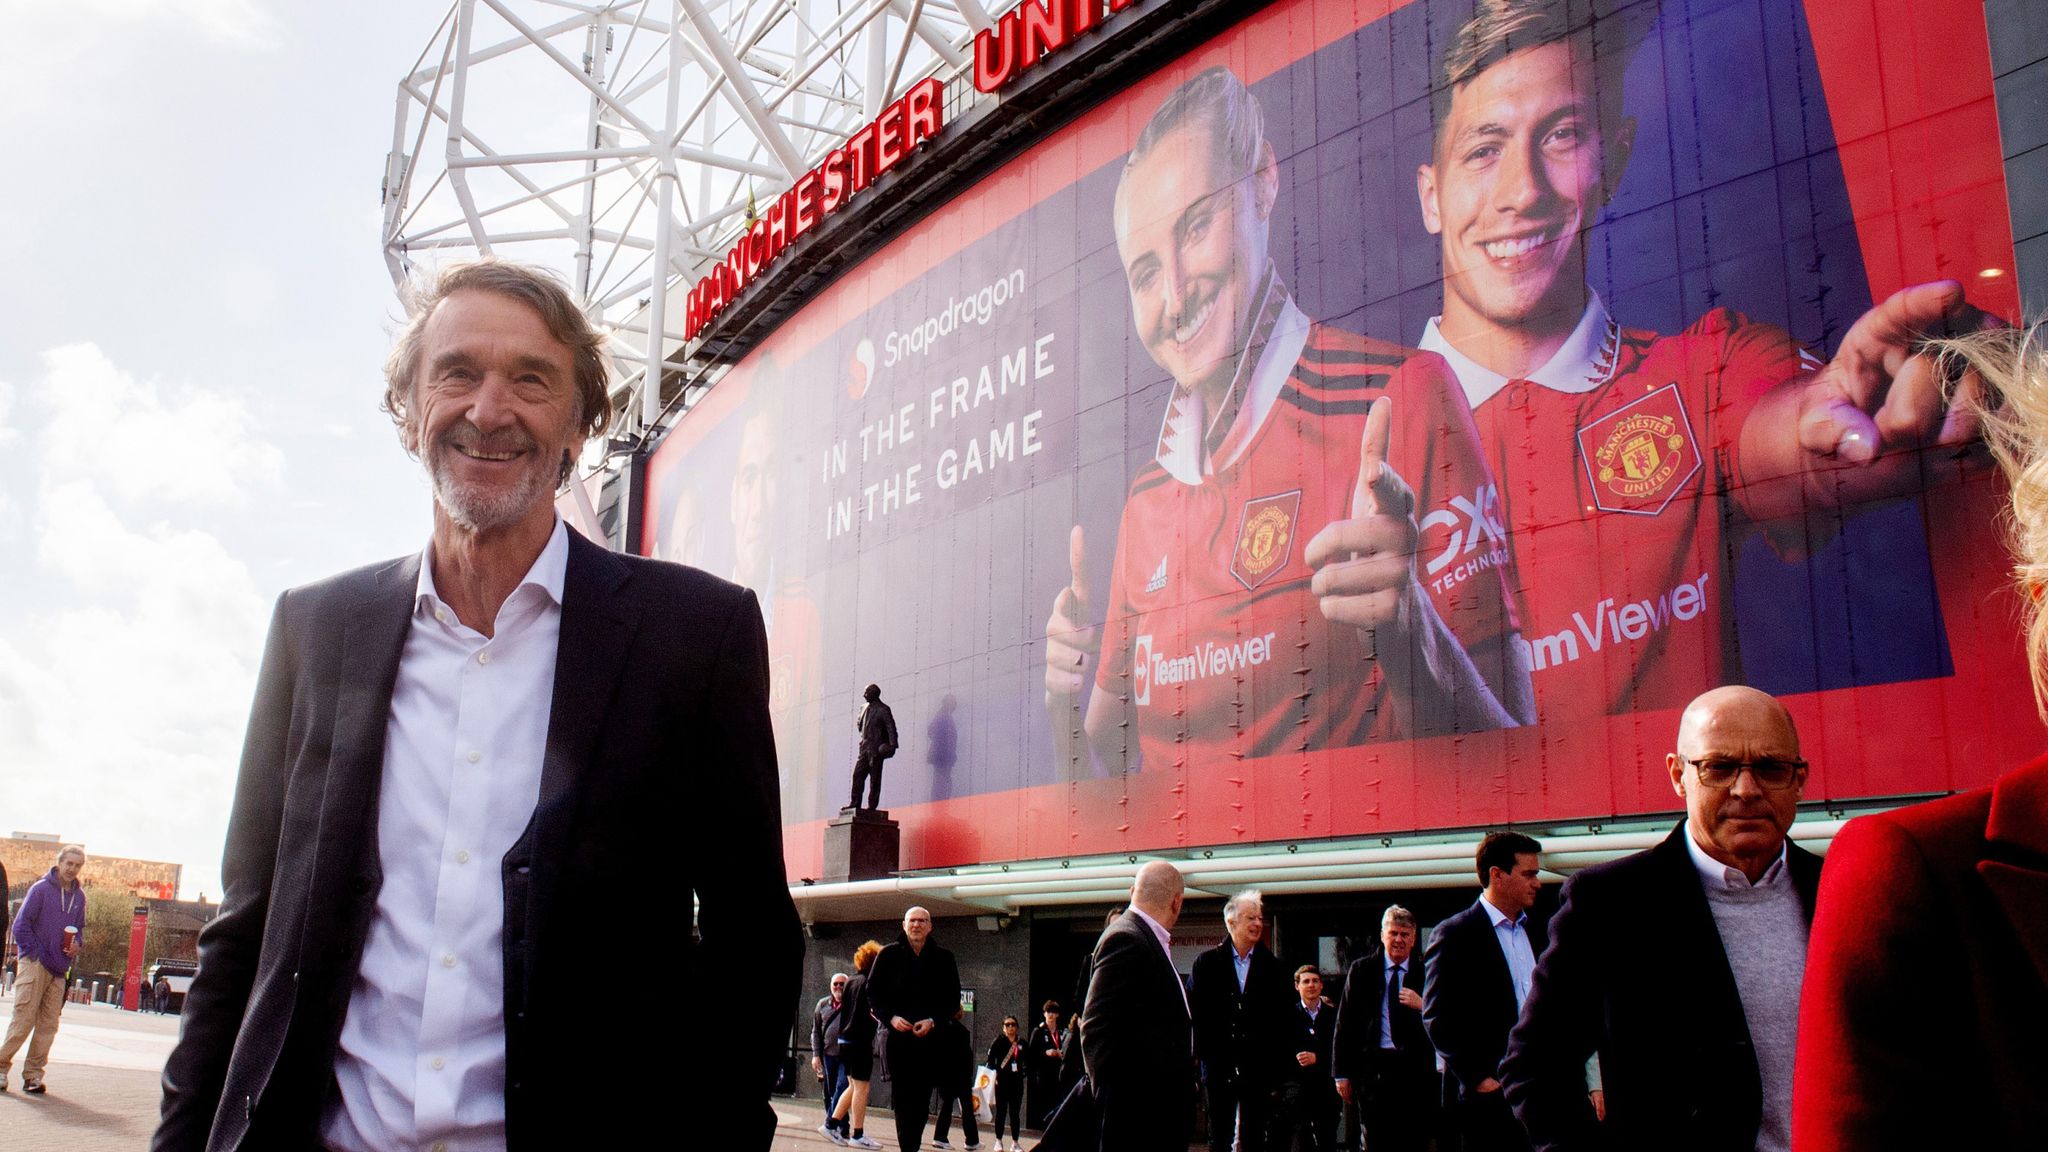 Sir Jim Ratcliffe to buy 25% of Manchester United for £1.3bn | UK News | Sky News